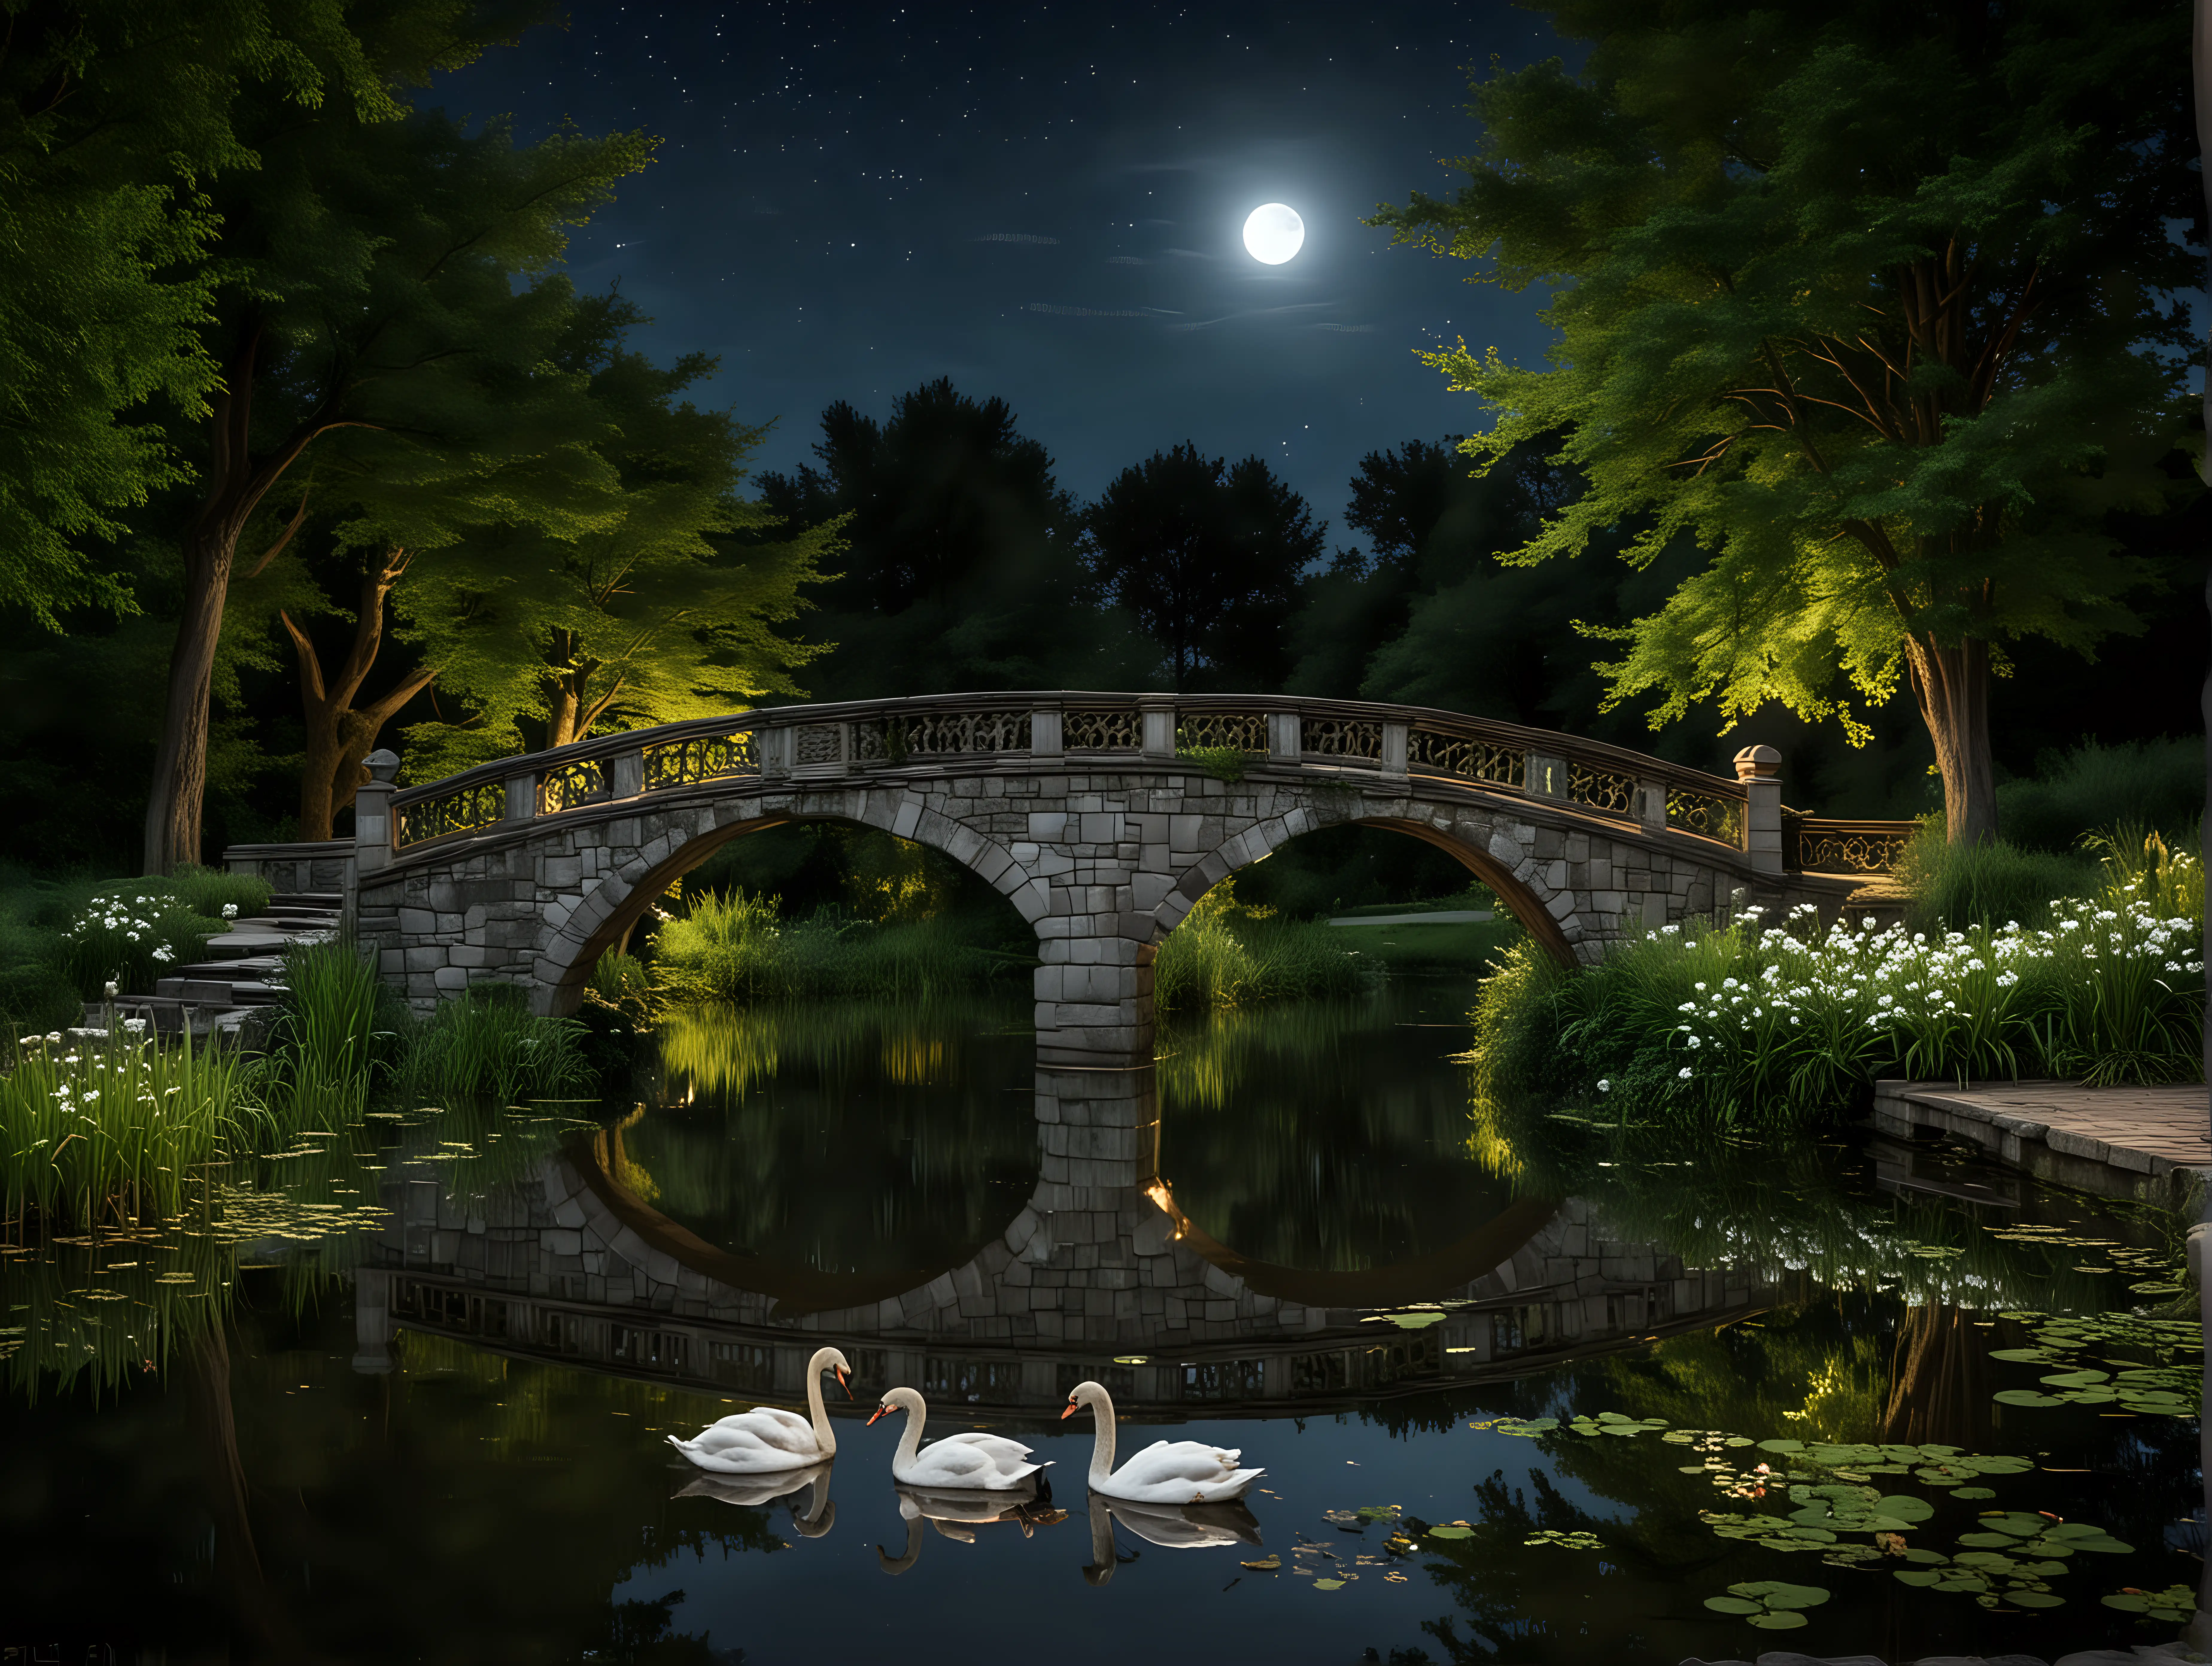 a stone arched bridge with trees on both sides over a beautiful pond with swans at night crescent moon